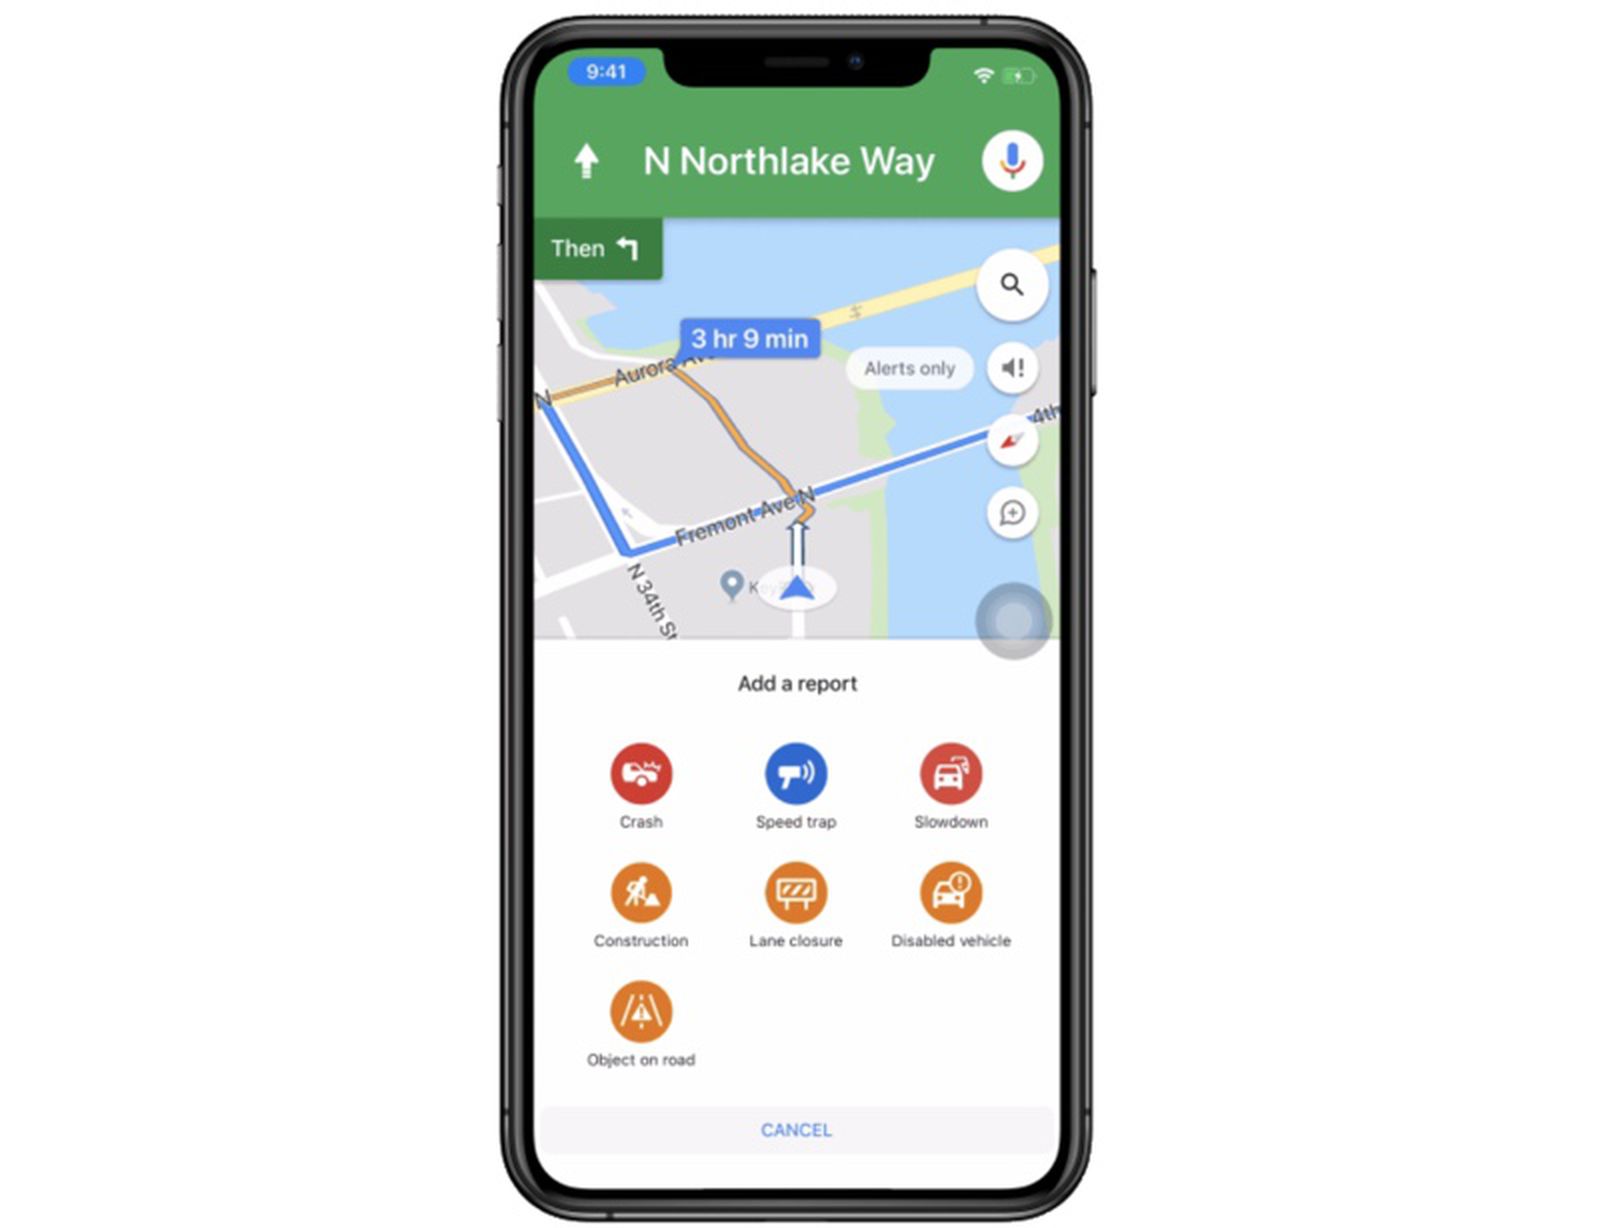 Google Maps for iOS Gains Feature for Reporting Traffic, Accidents, Road Construction and More - MacRumors